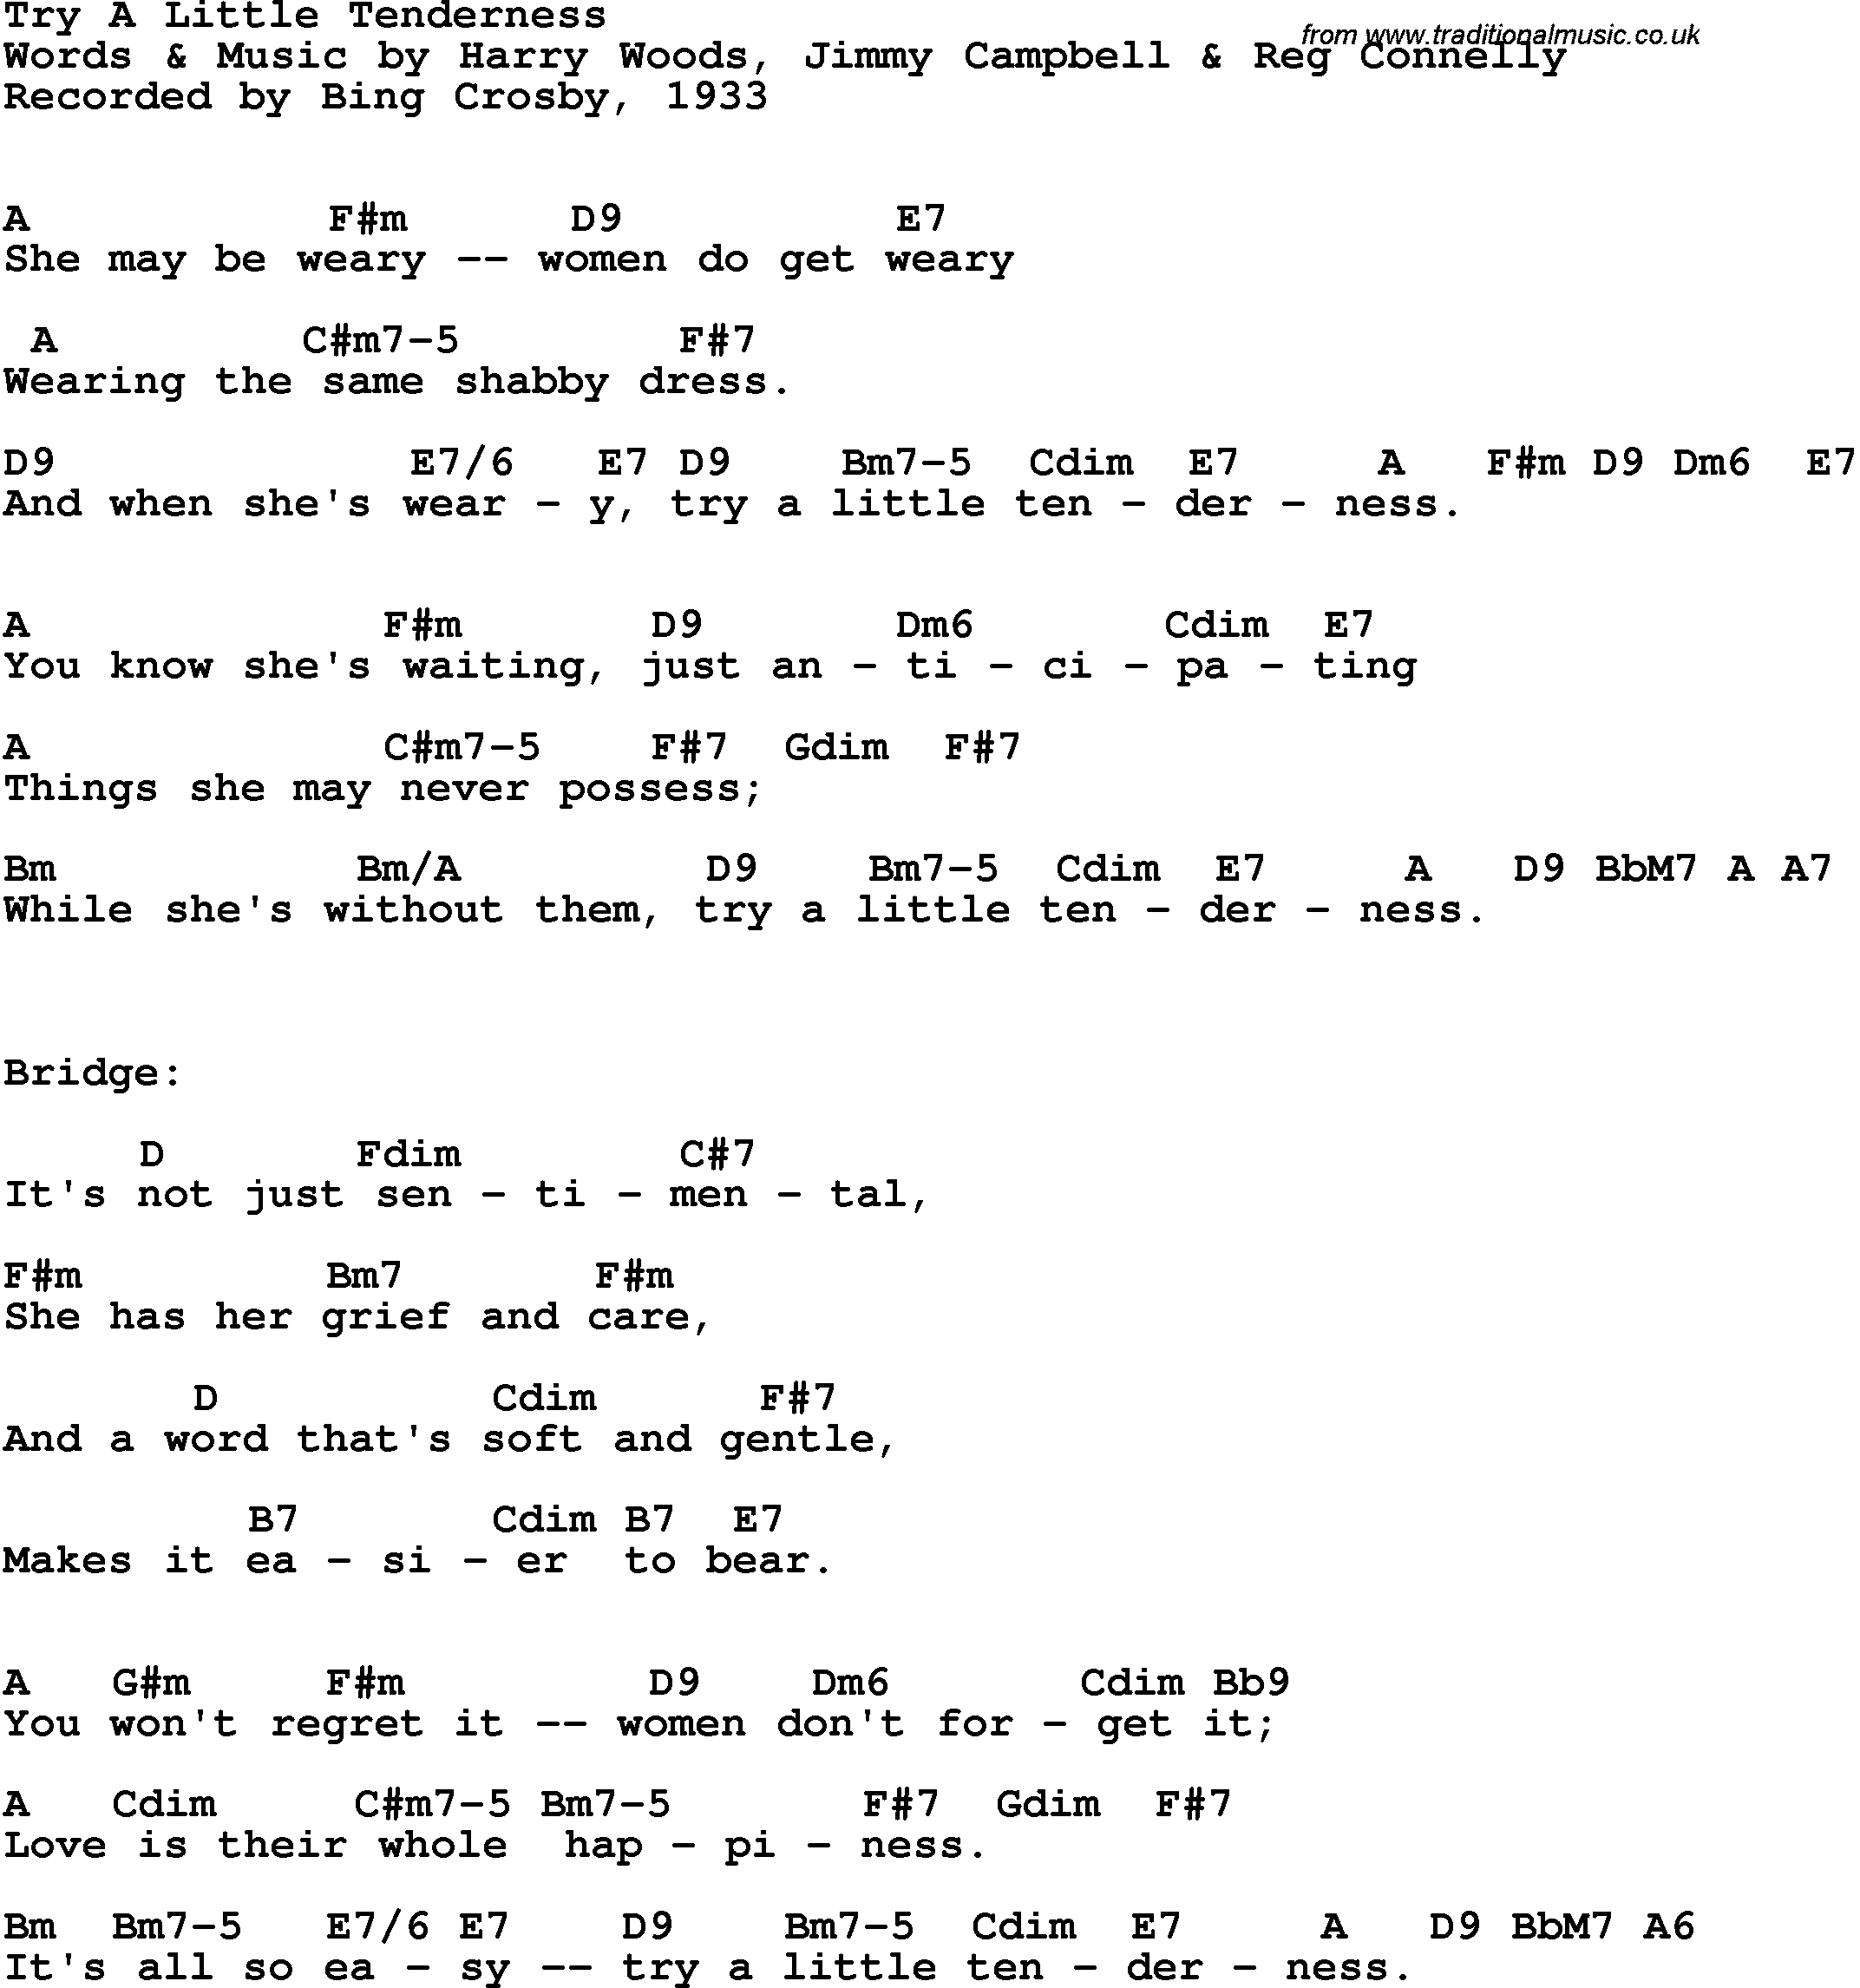 Song Lyrics with guitar chords for Try A Little Tenderness - Bing Crosby, 1933